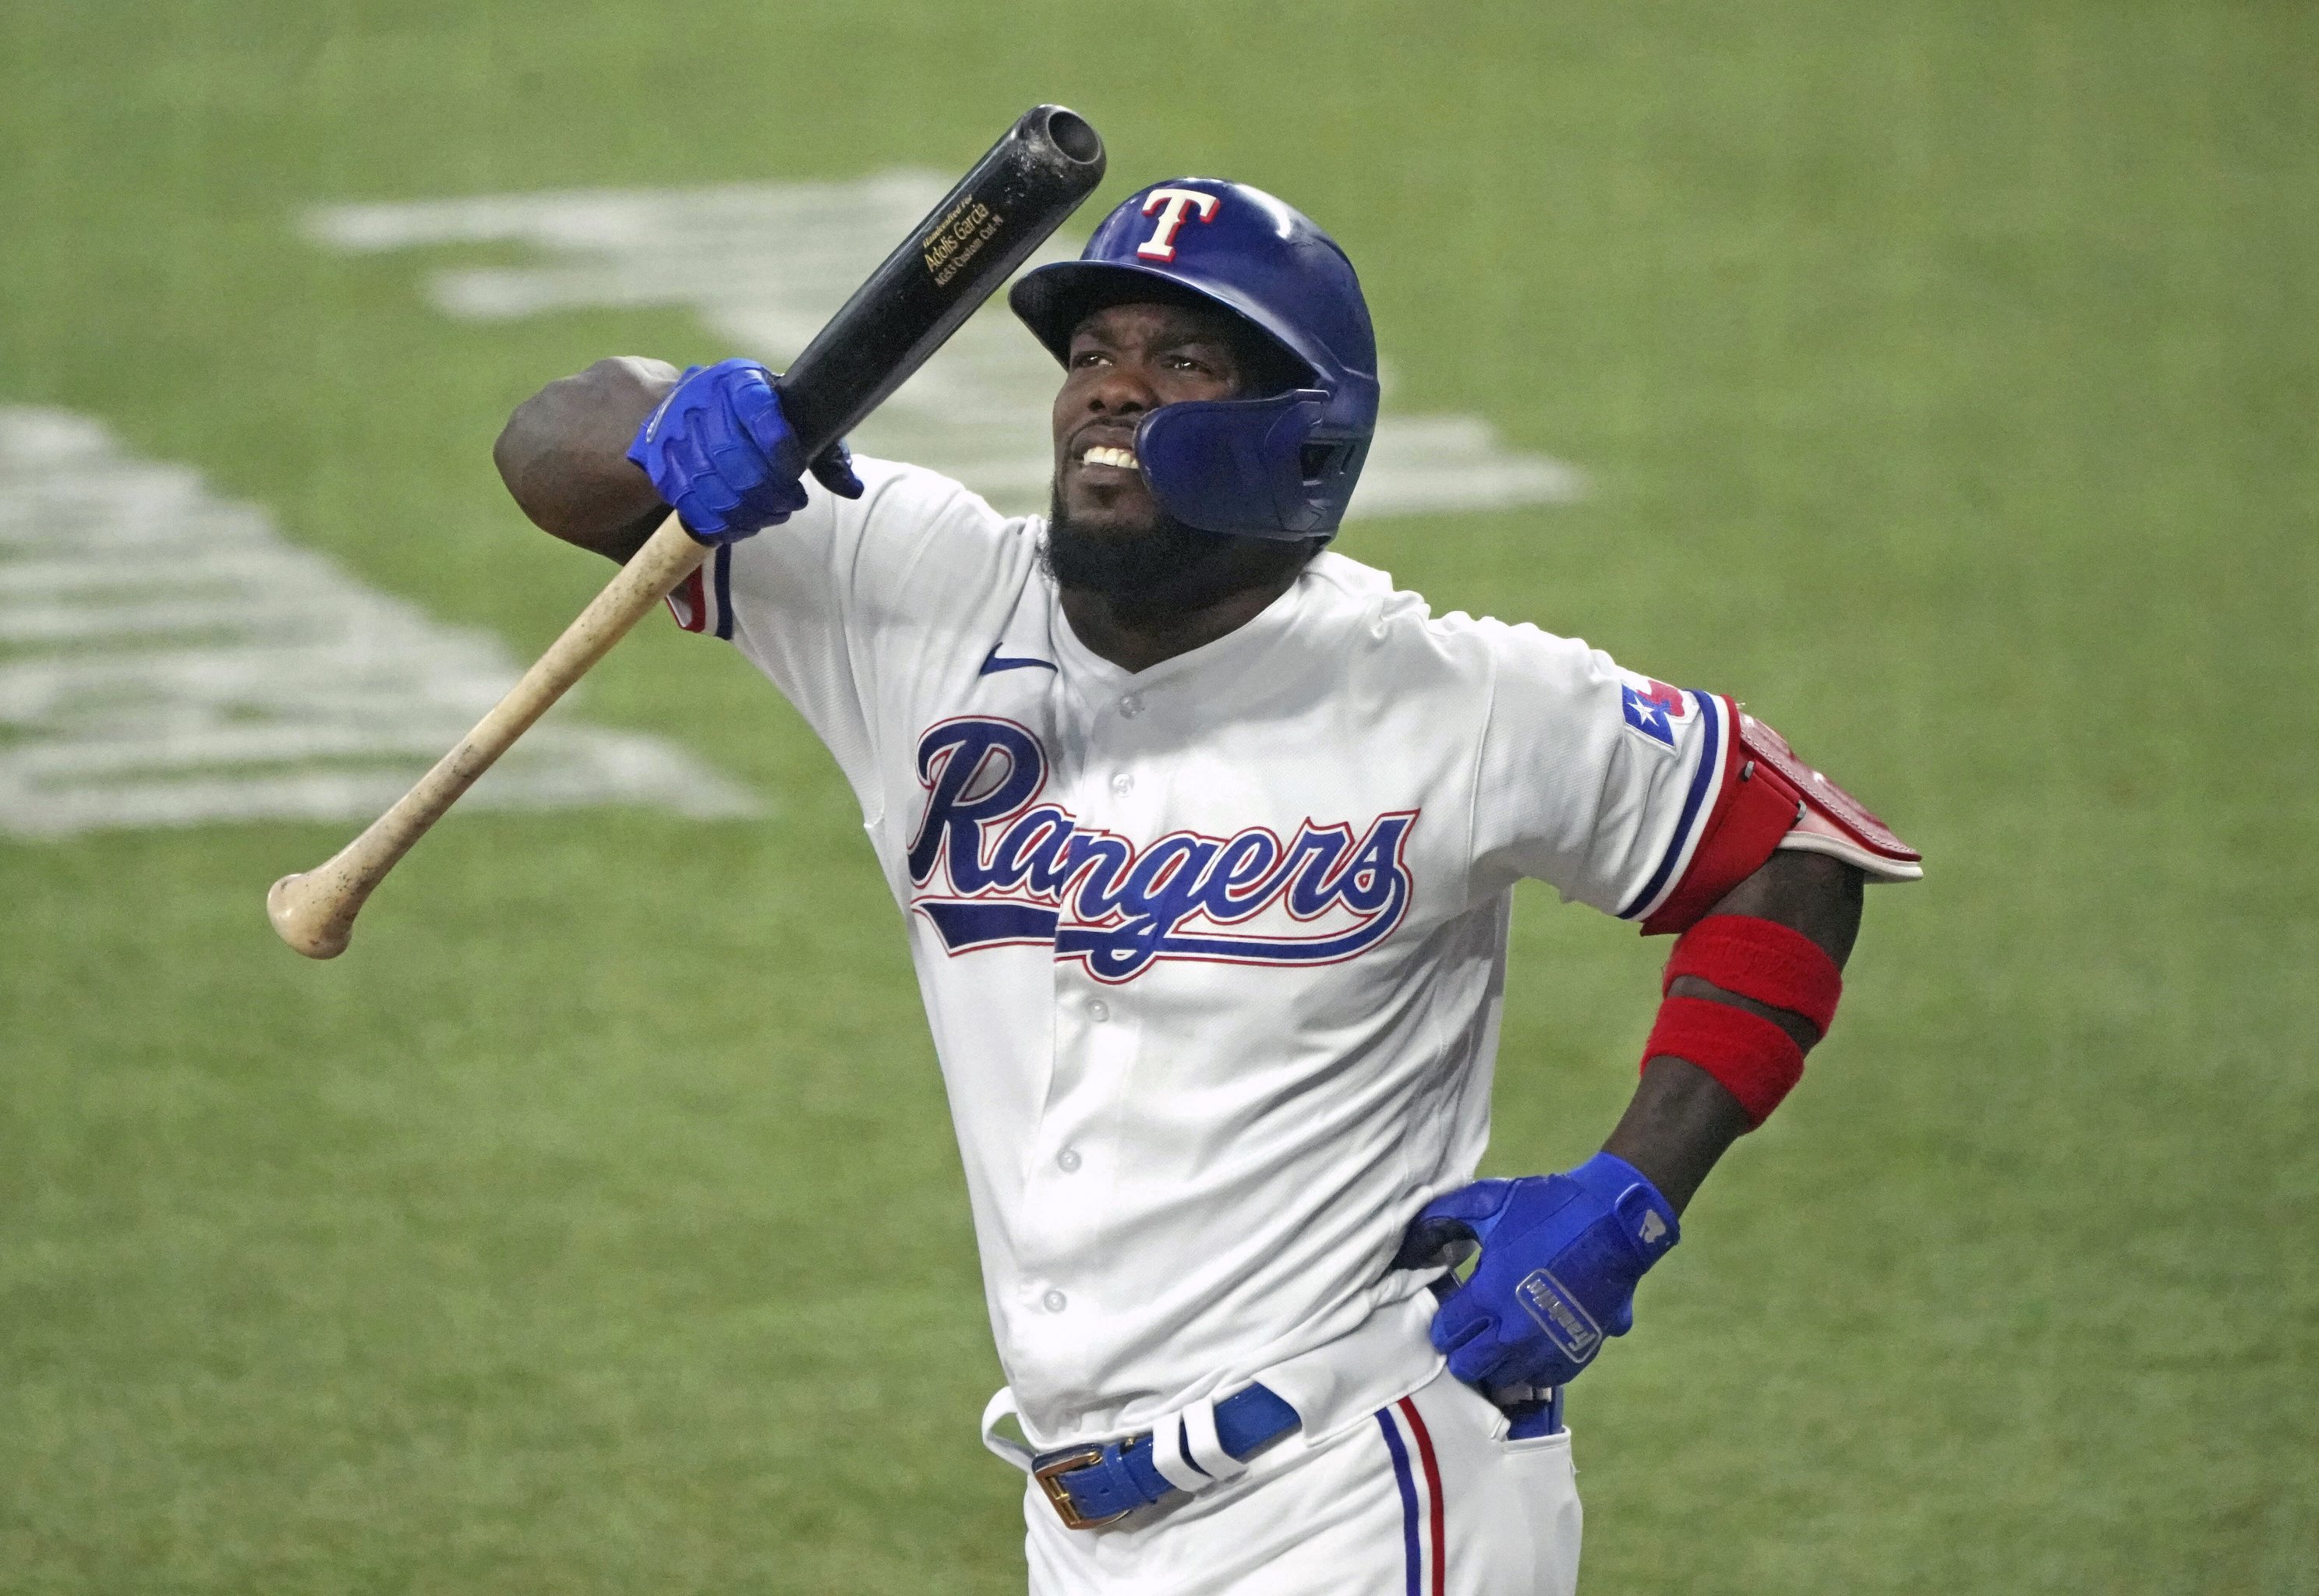 Adolis Garcia's extra-inning walk-off homer saved Rangers from what would  have been a soul crushing loss